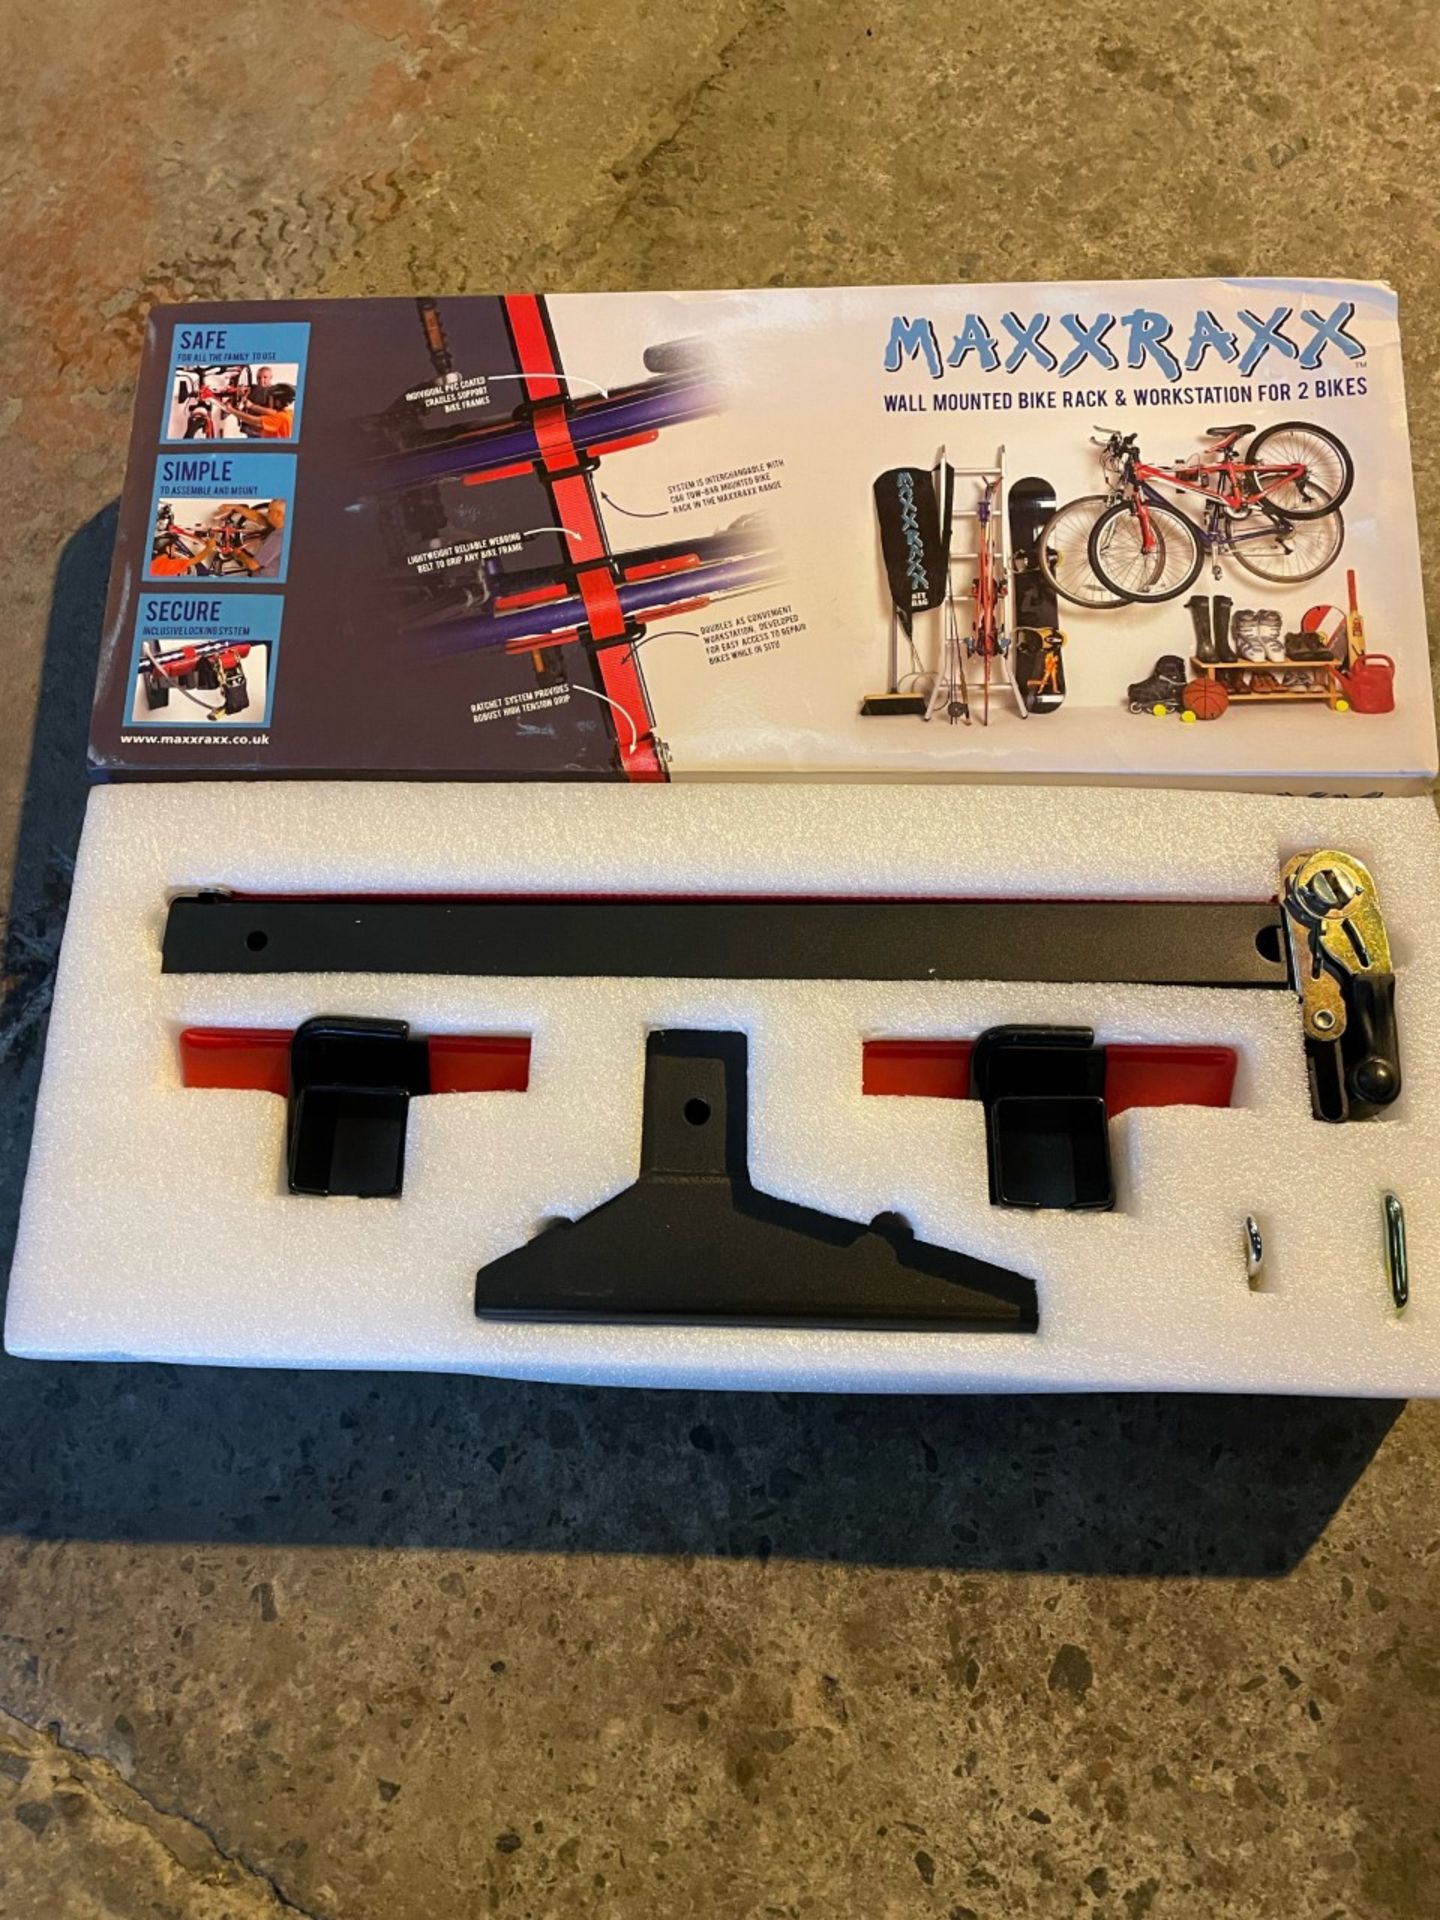 Maxxraxx wall mounted bike rack and work station for 2 bikes. New in box